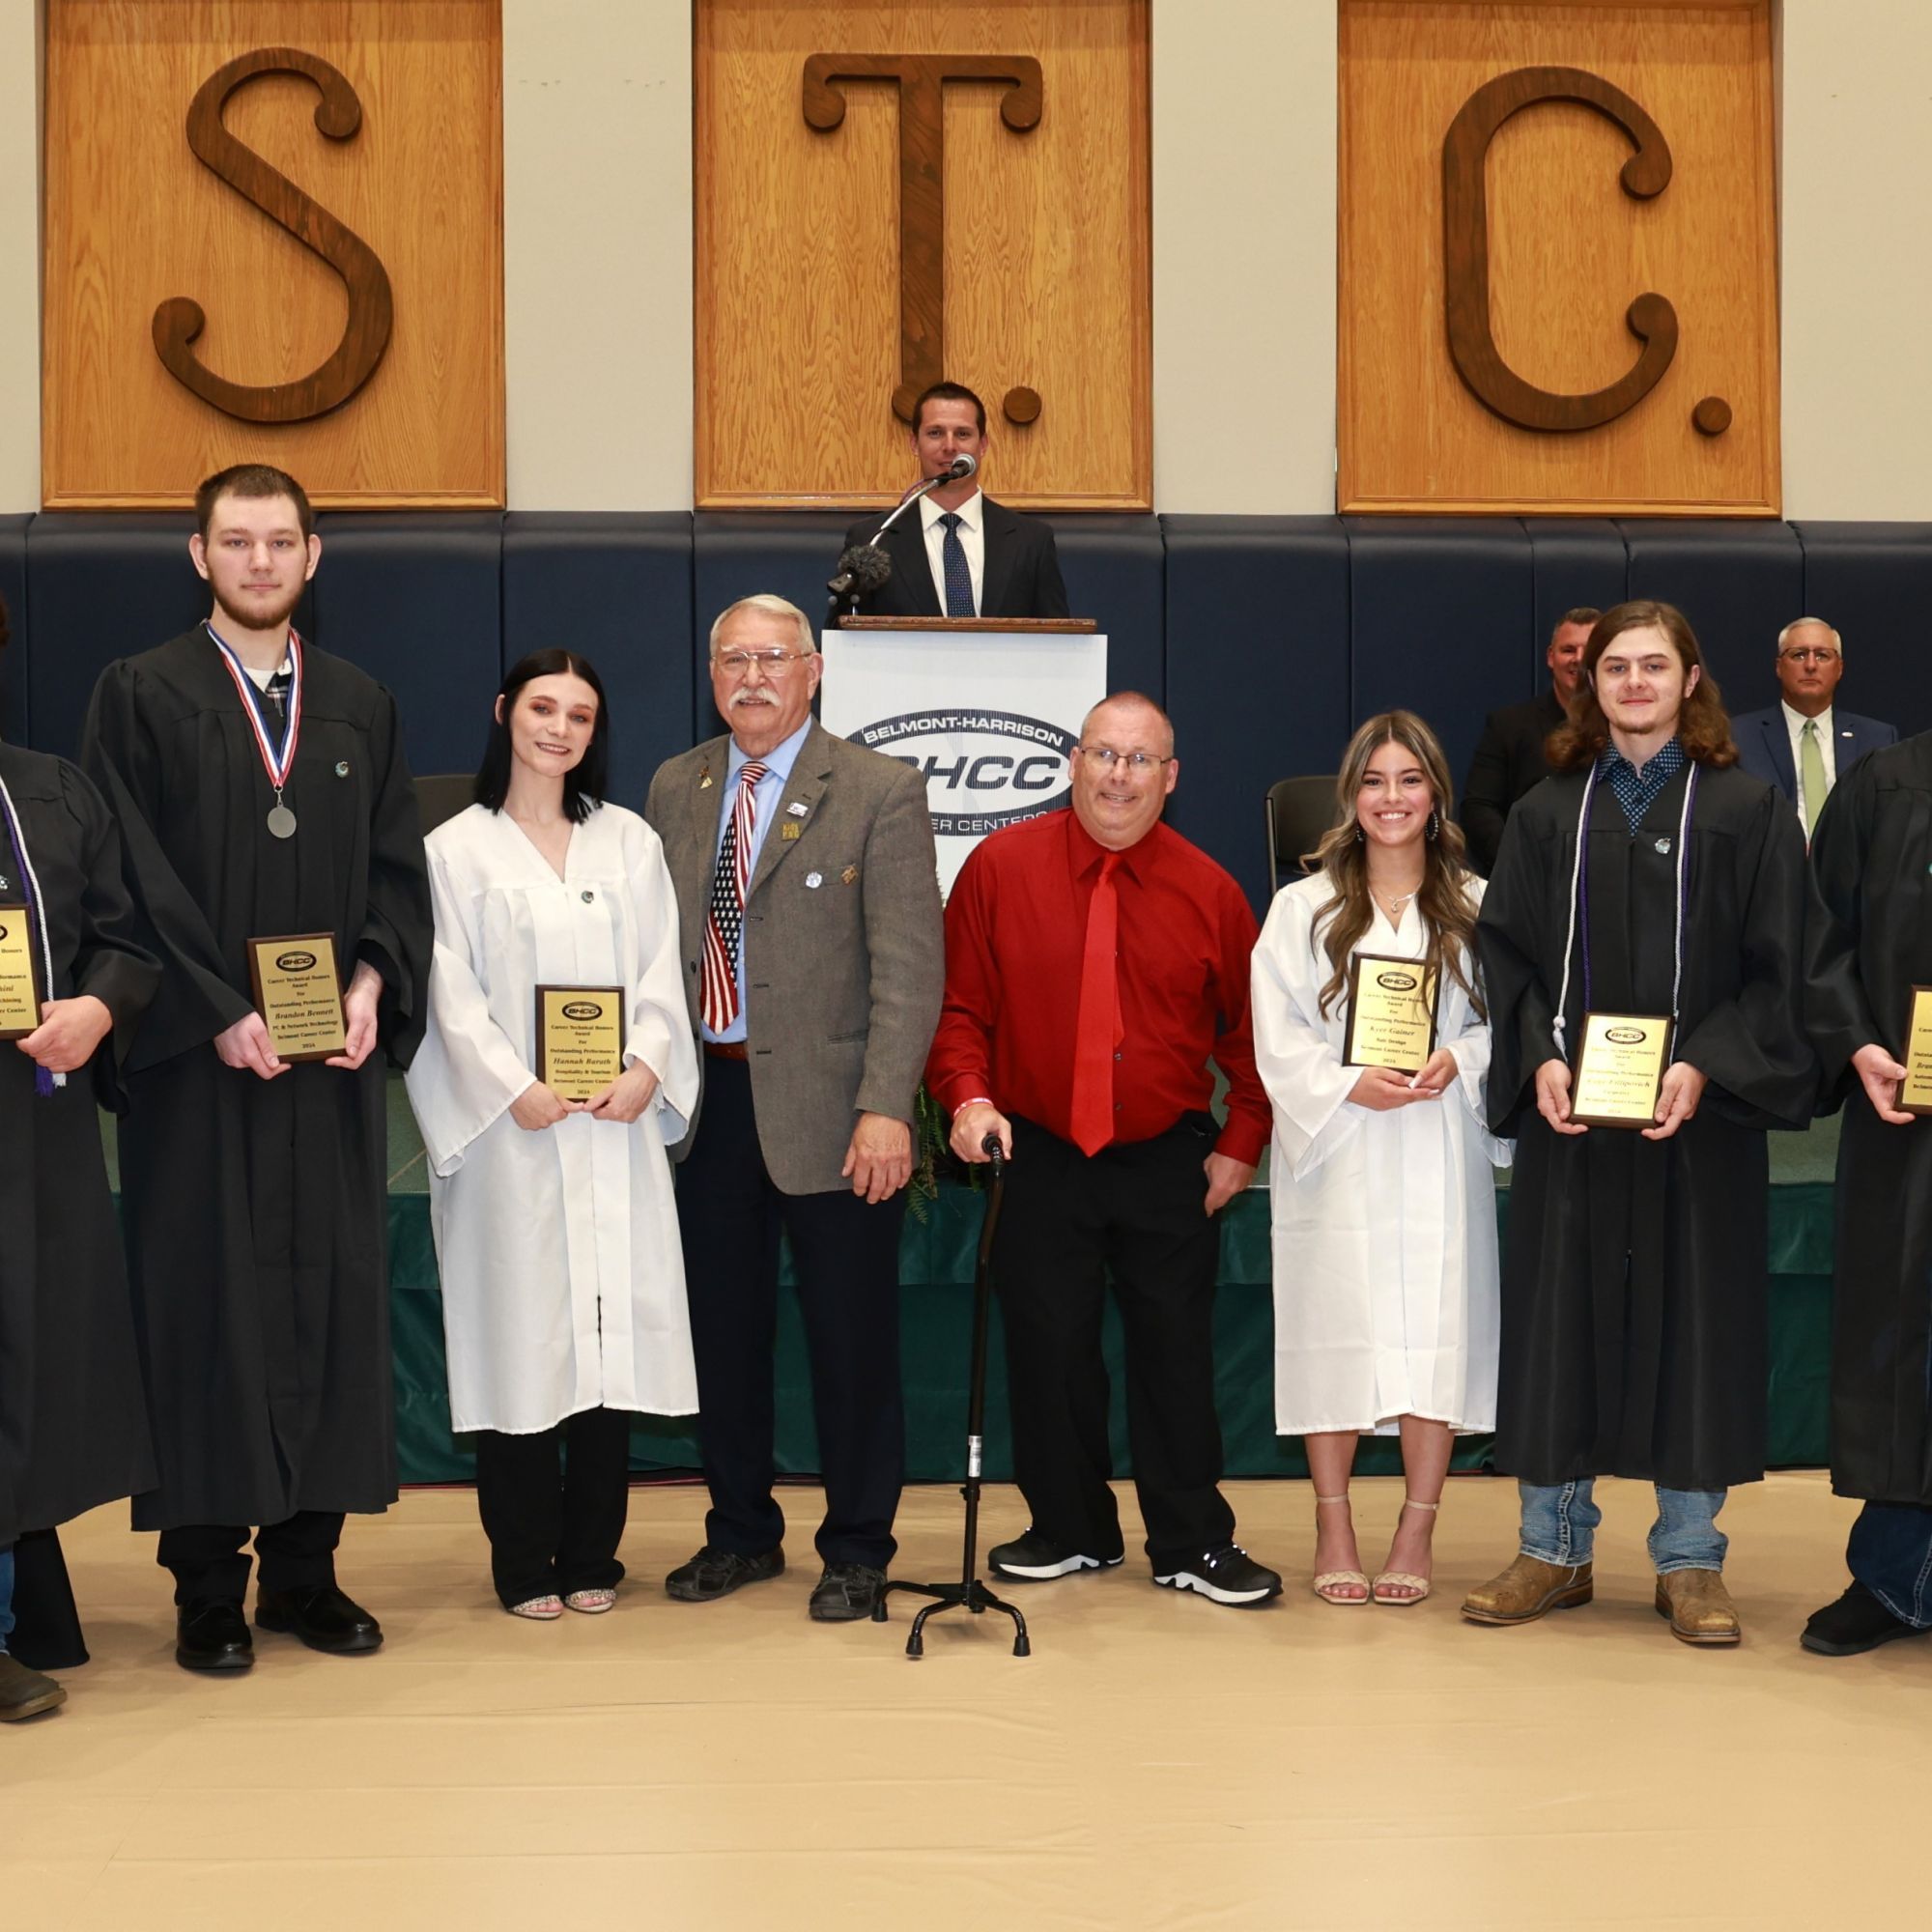 BCC Career-Technical Honors Awards